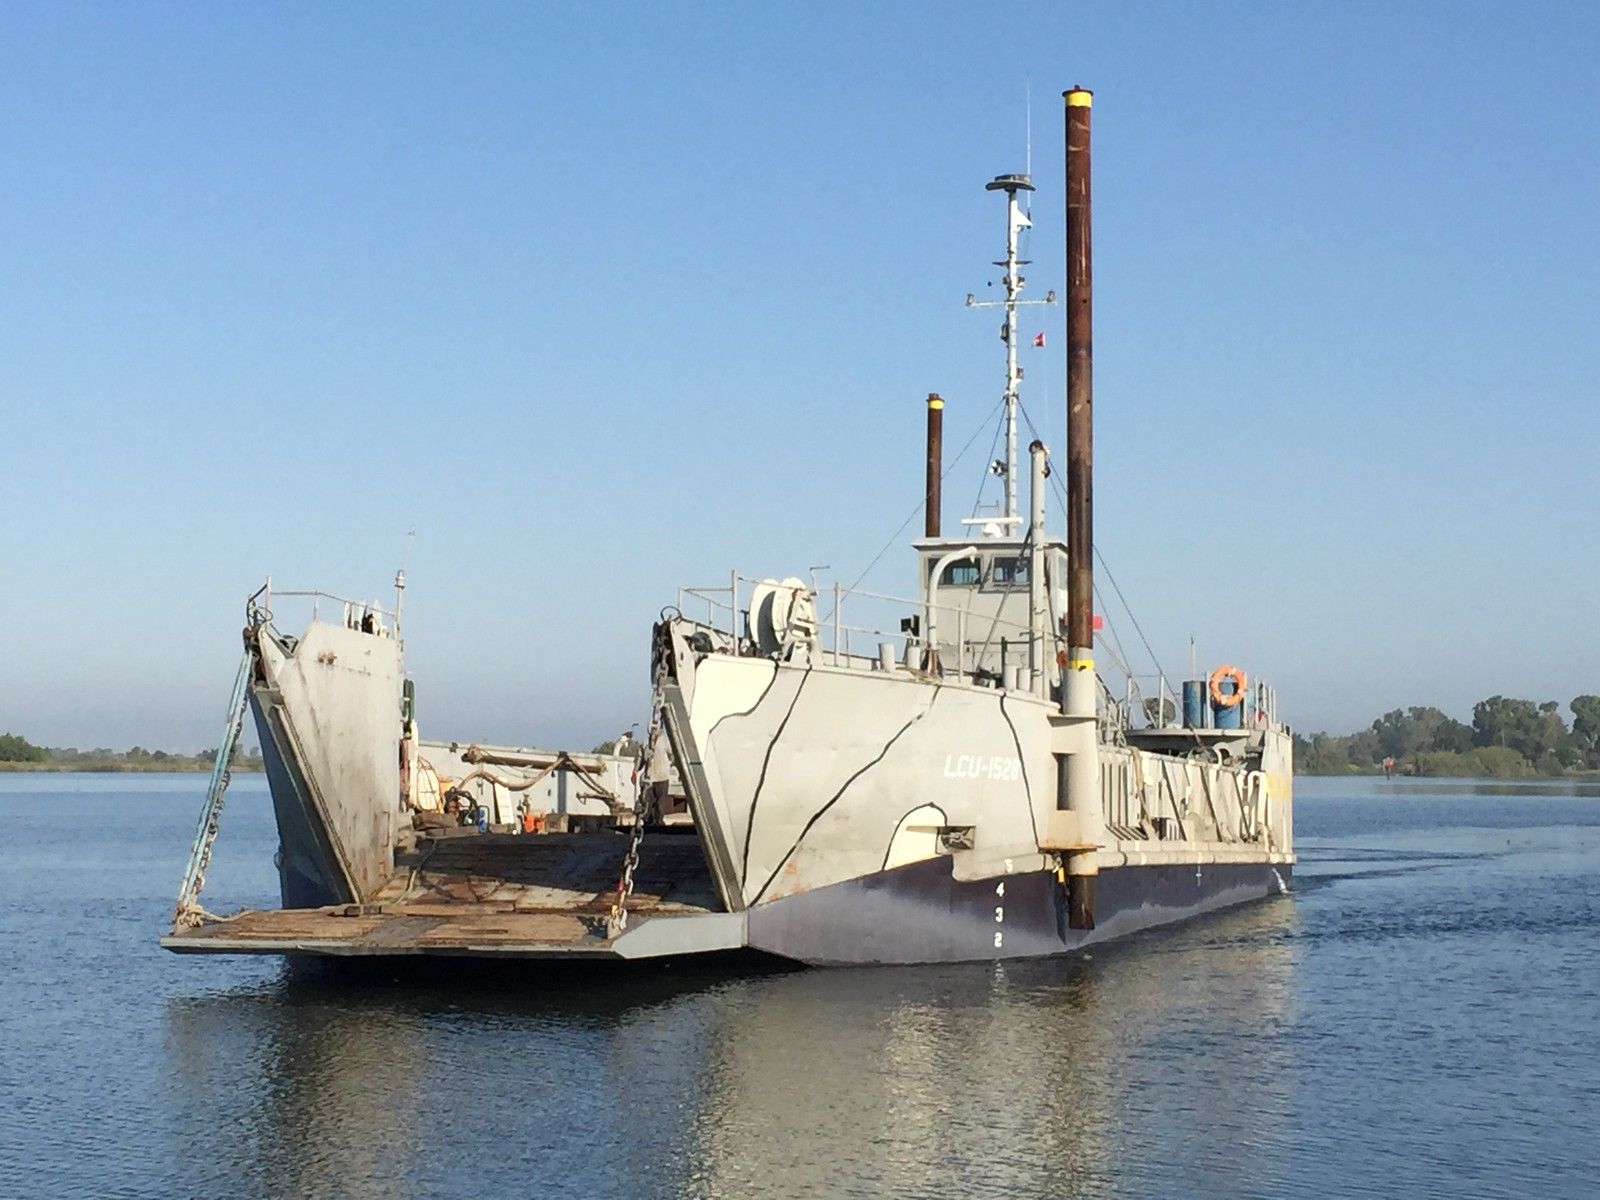 LCU Landing Craft 2015 for sale for $850,000 - Boats-from ...